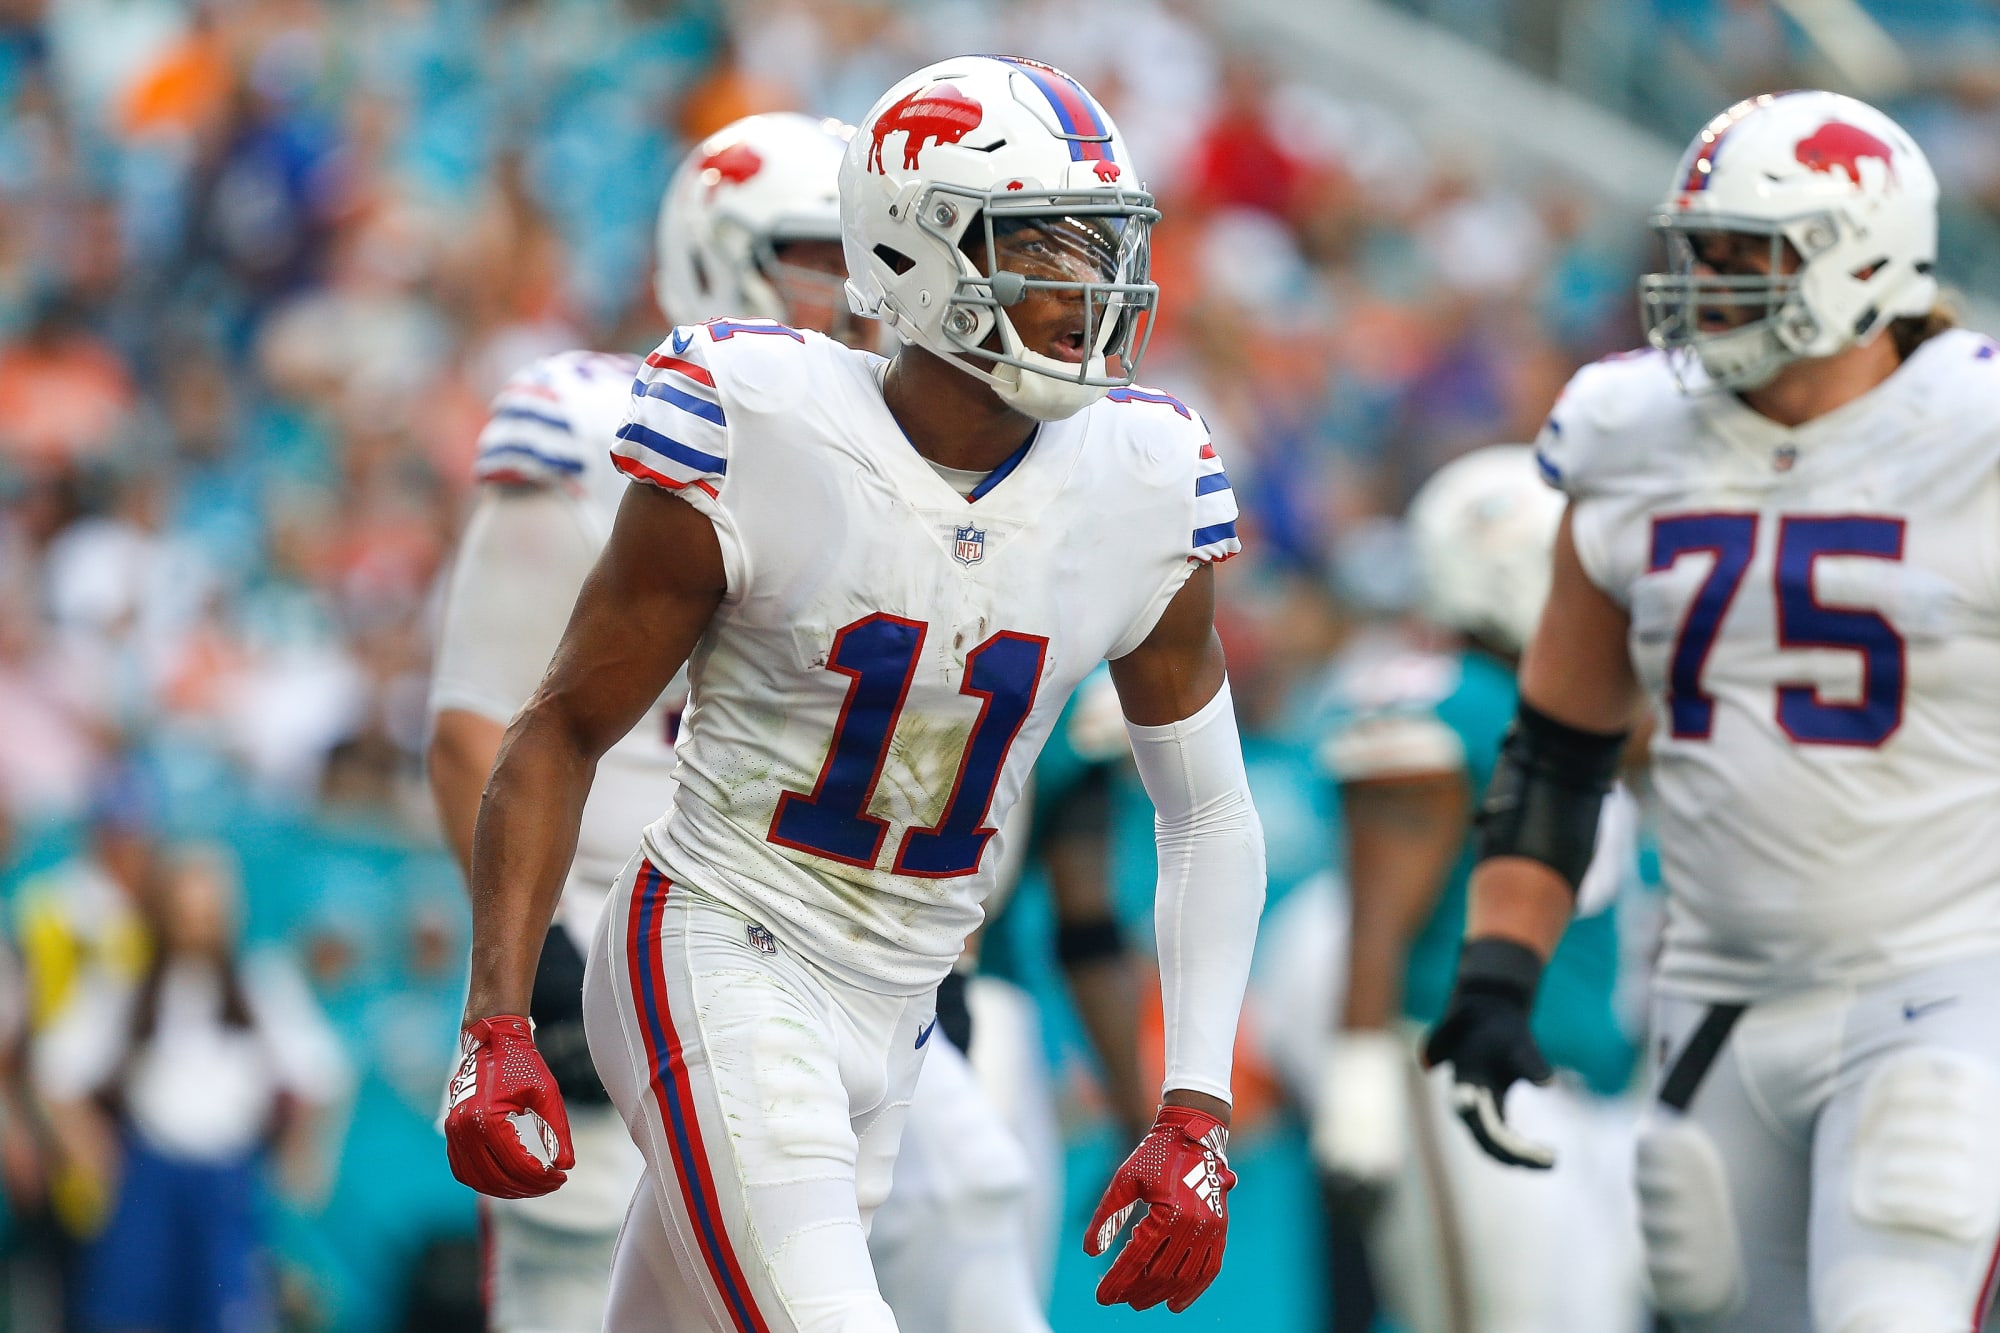 Buffalo Bills Who is currently the number one receiver?